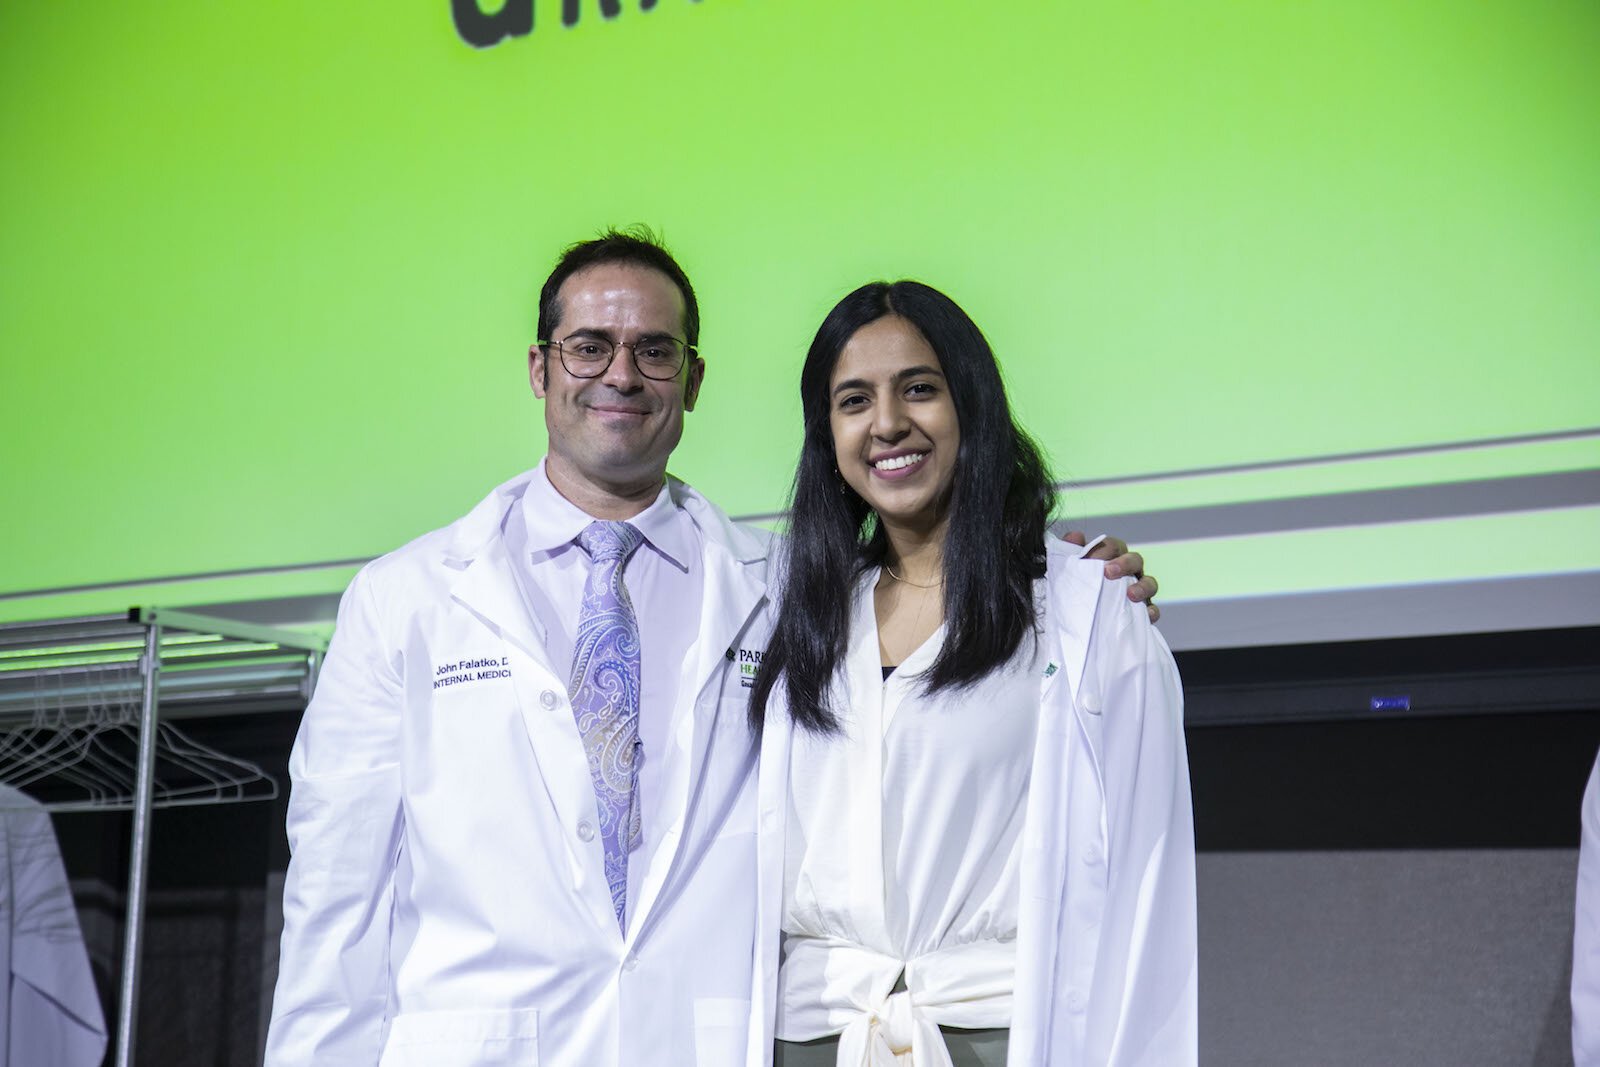 Parkview Health launched a graduate medical education (GME) program, also known as a medical residency, in Fort Wayne. A white coat ceremony in June 2022 officially welcomed the new resident physicians, including Dr. Payal Shukla, right.